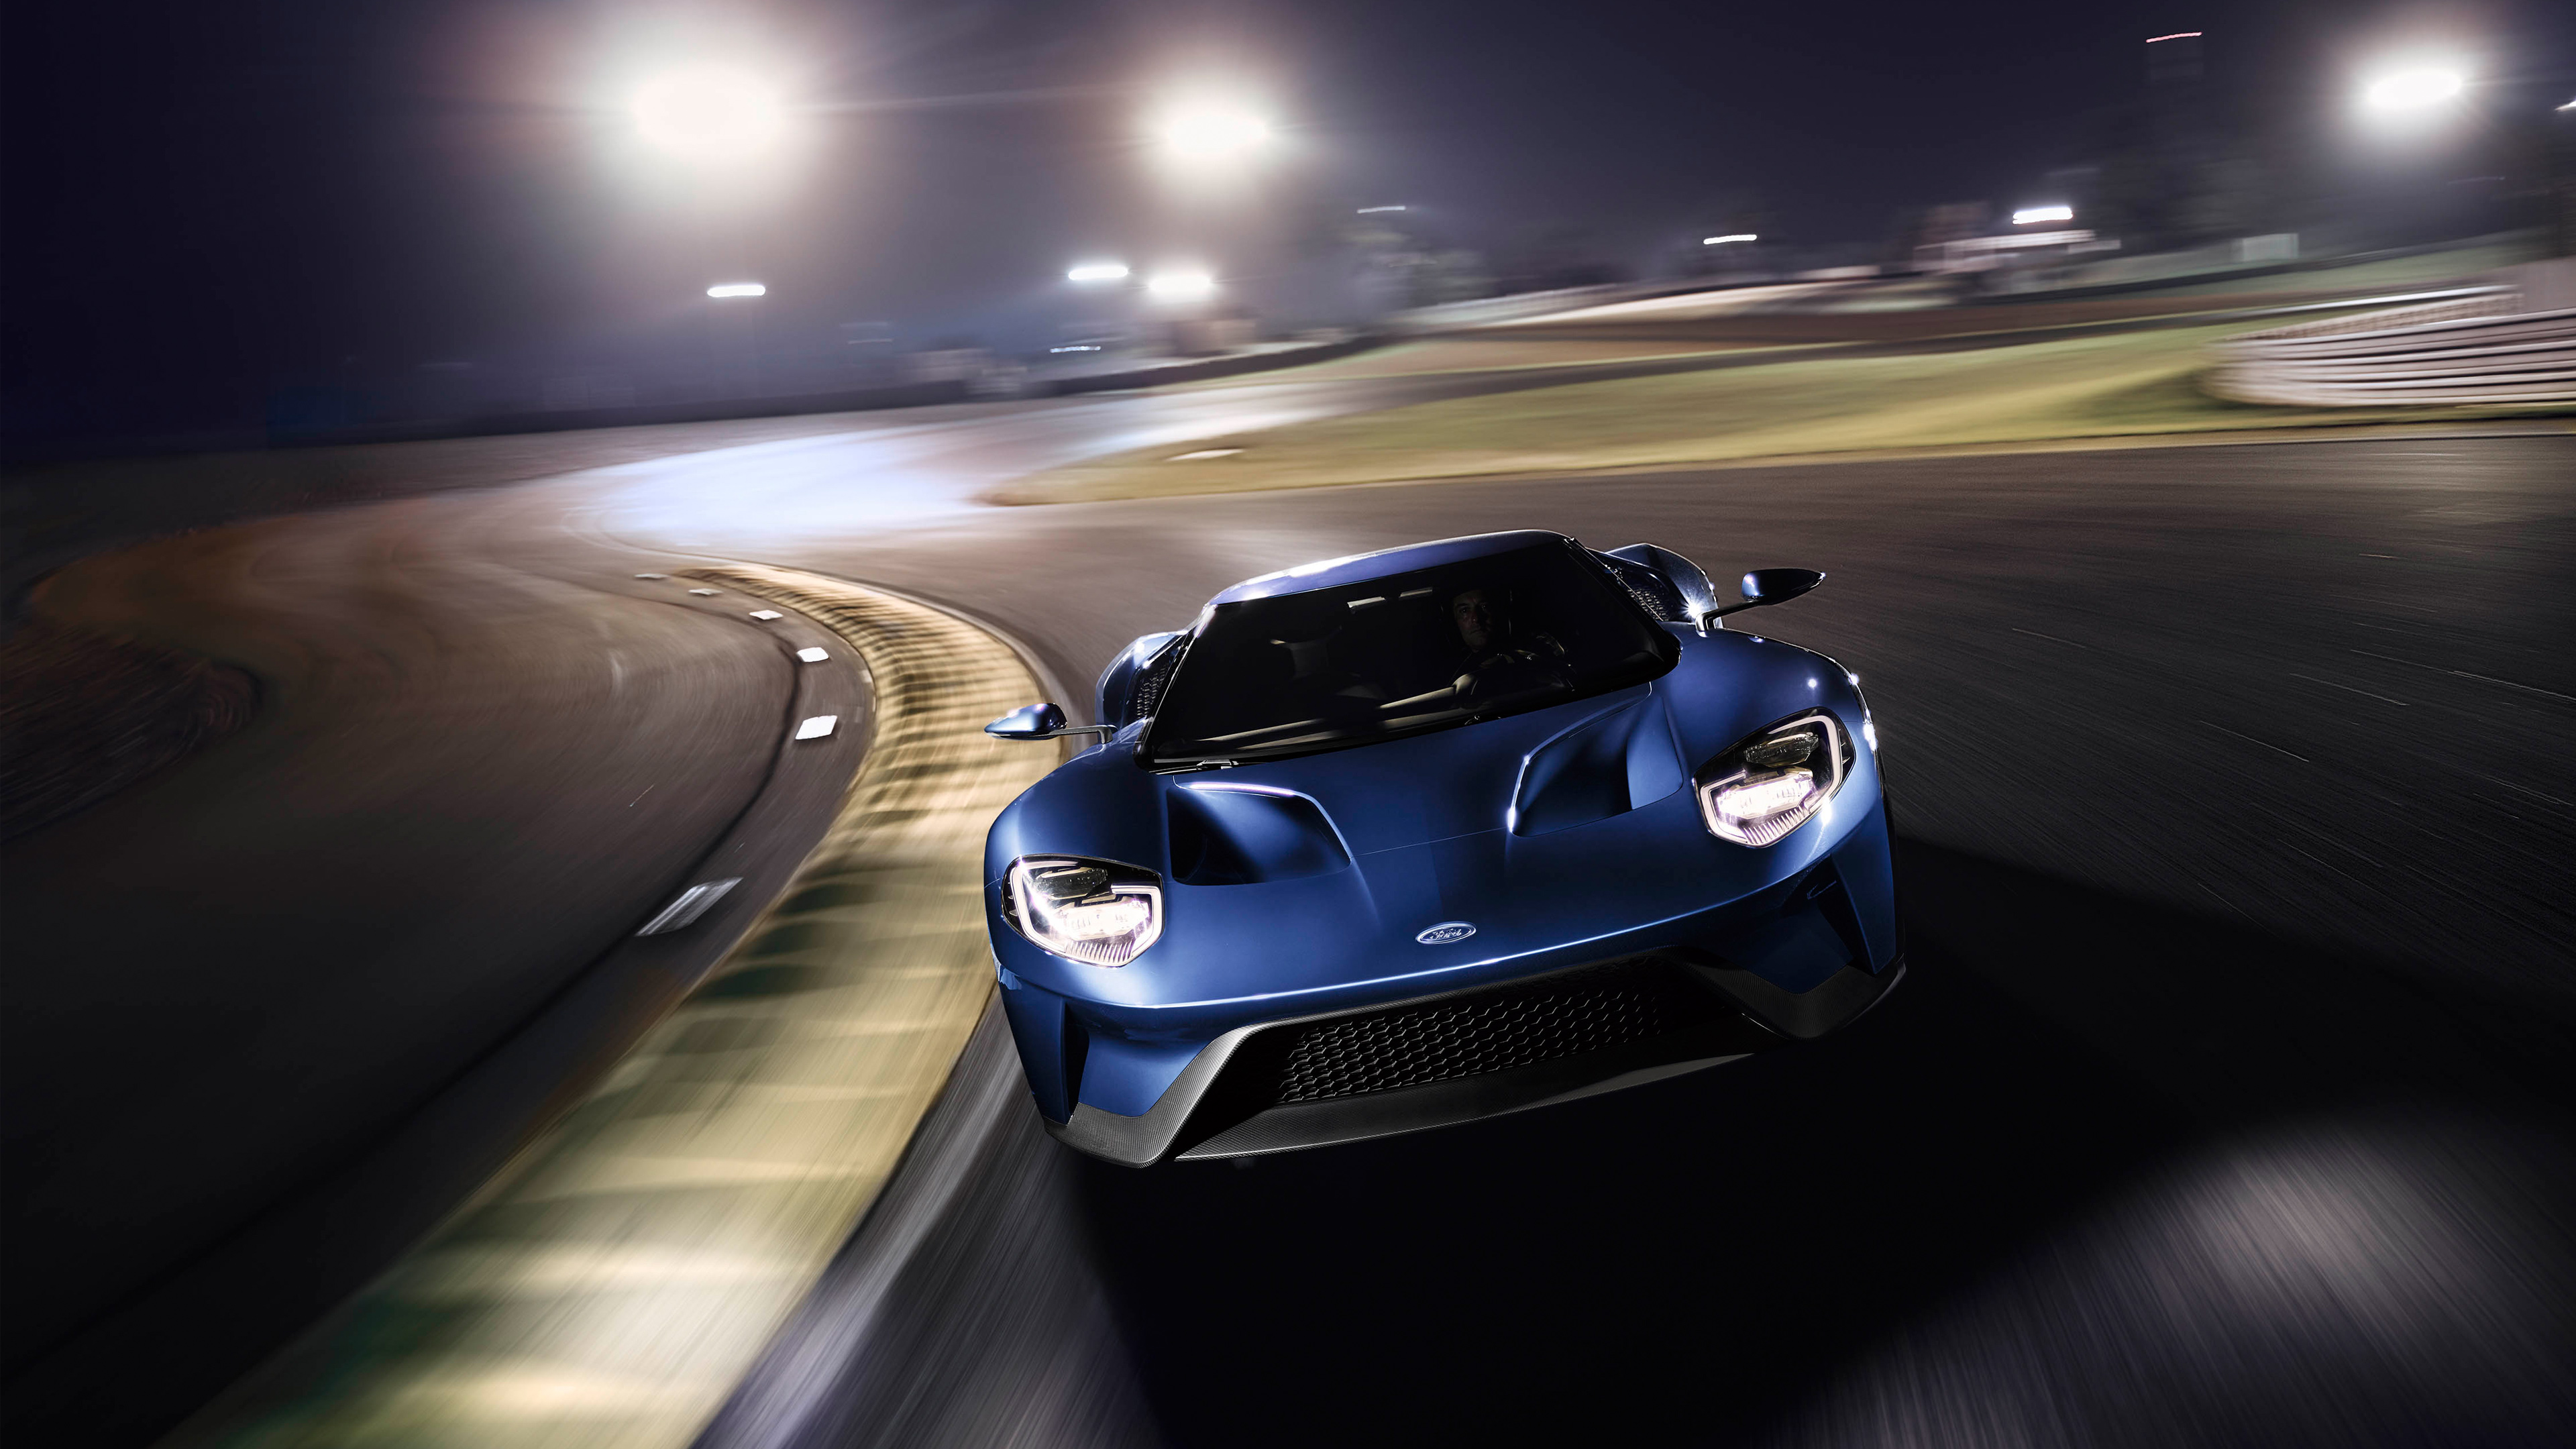 2017 Ford Gt Wallpaper Hd - Ford Gt 2017 , HD Wallpaper & Backgrounds